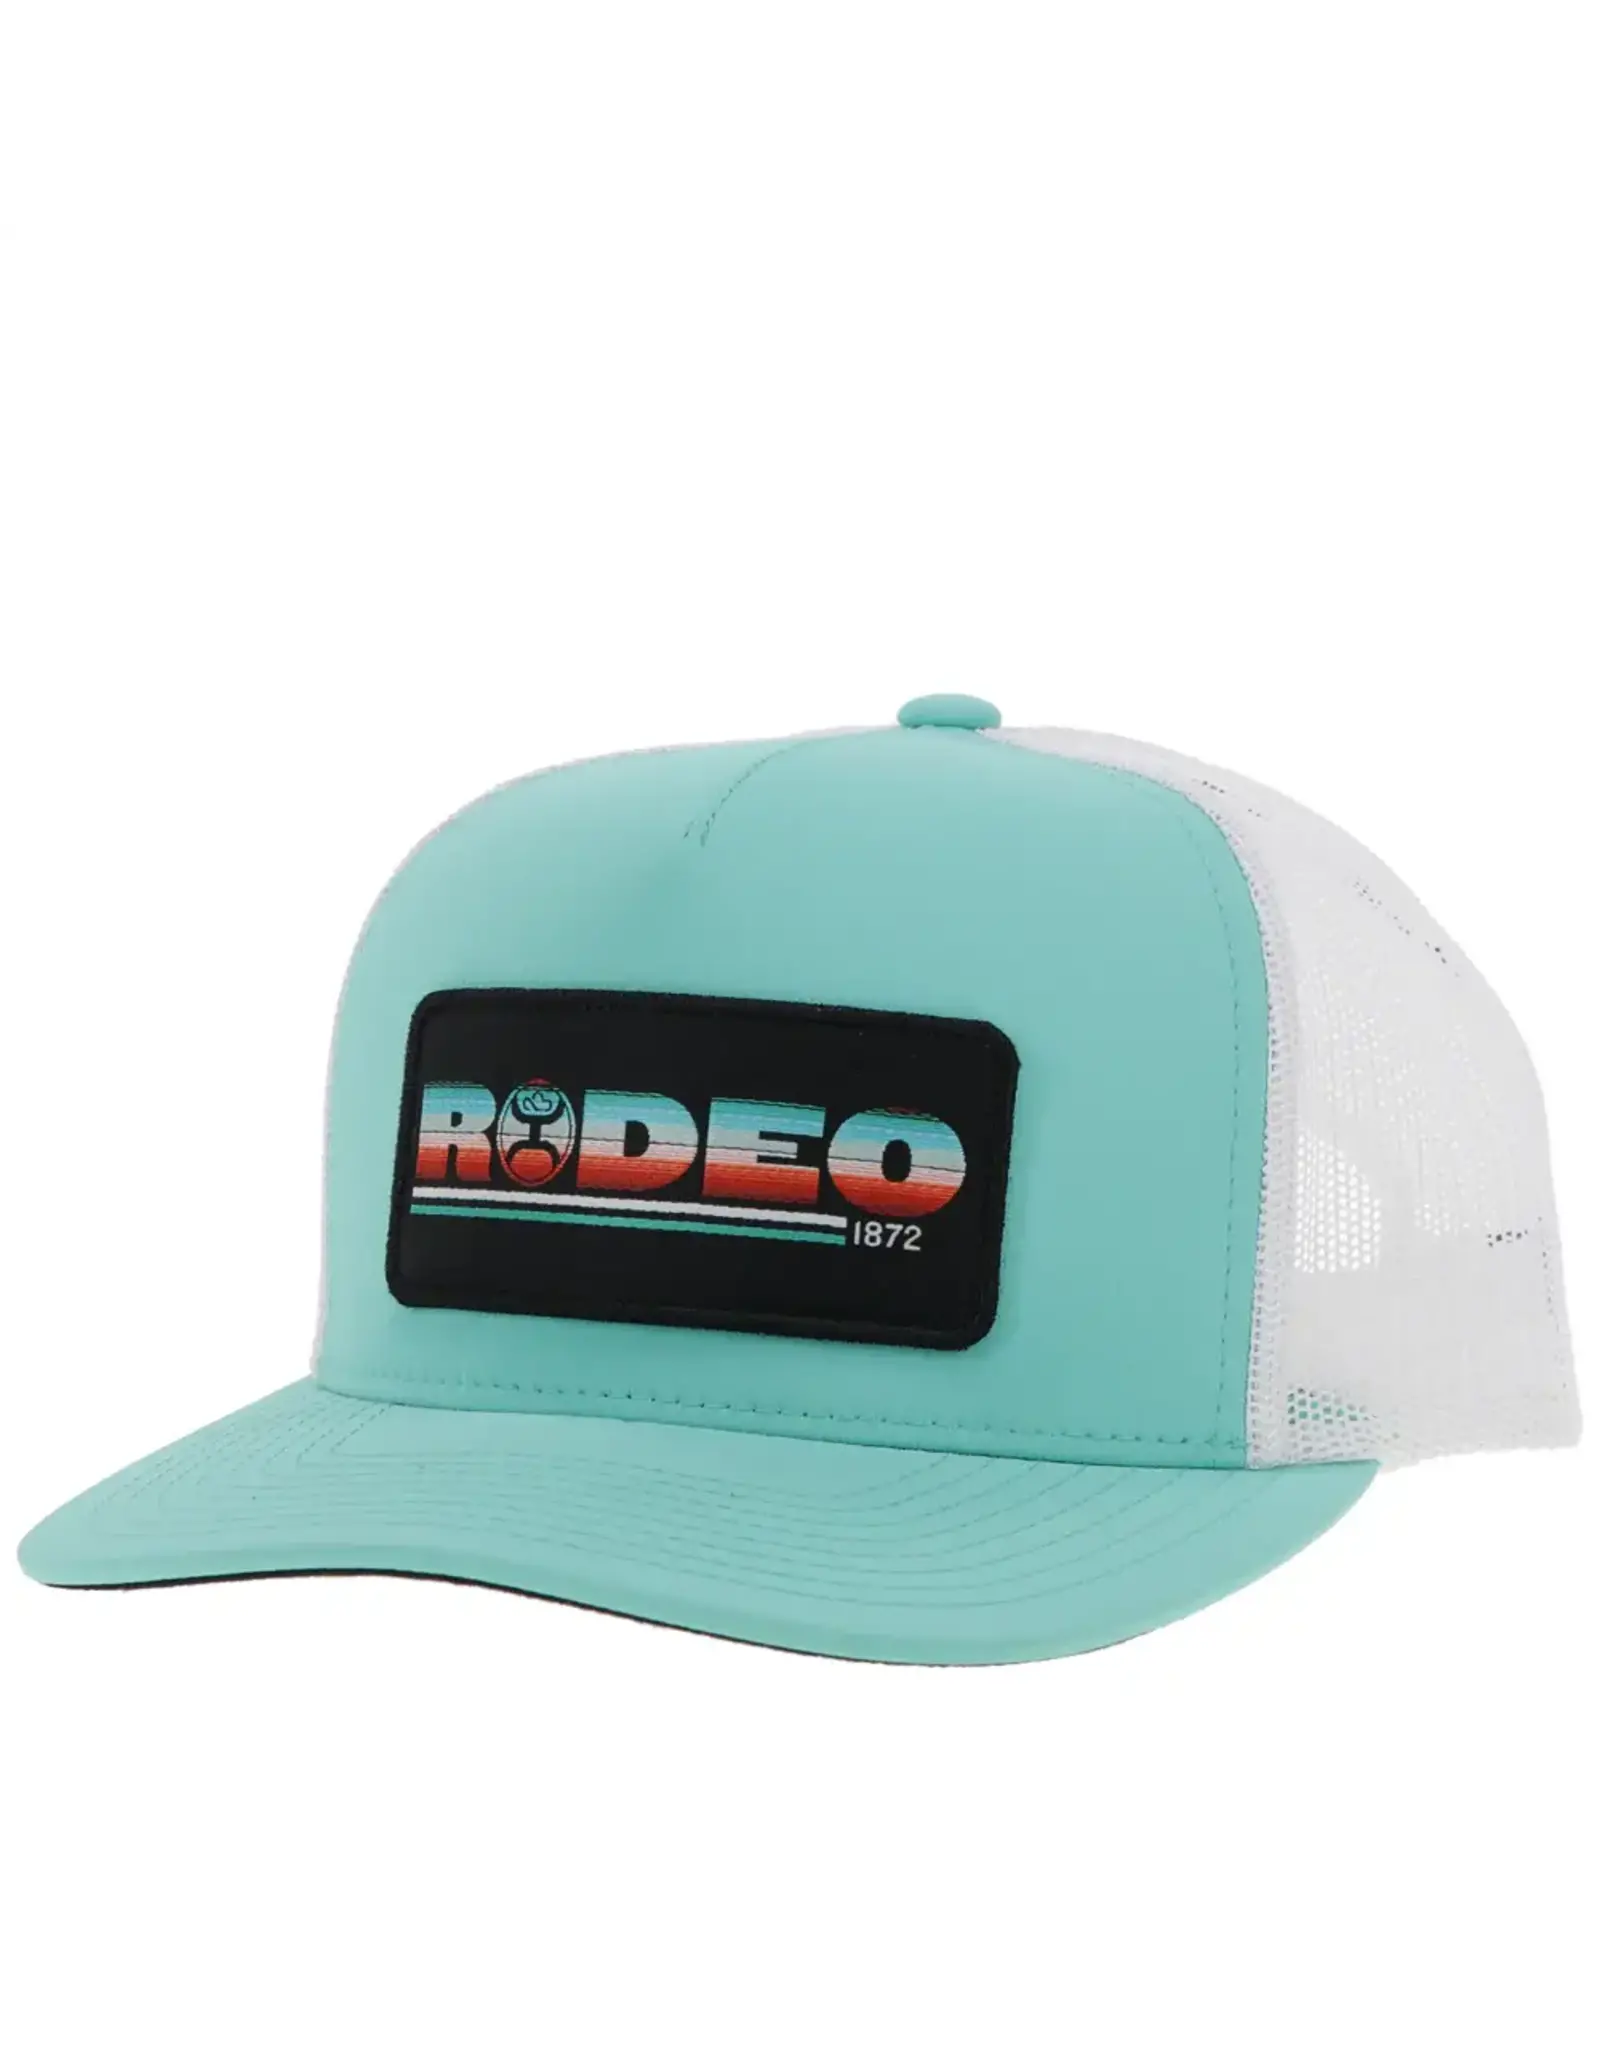 Hooey Brands Hat "Rodeo" Turquoise/ White w/Serape & Black Patch